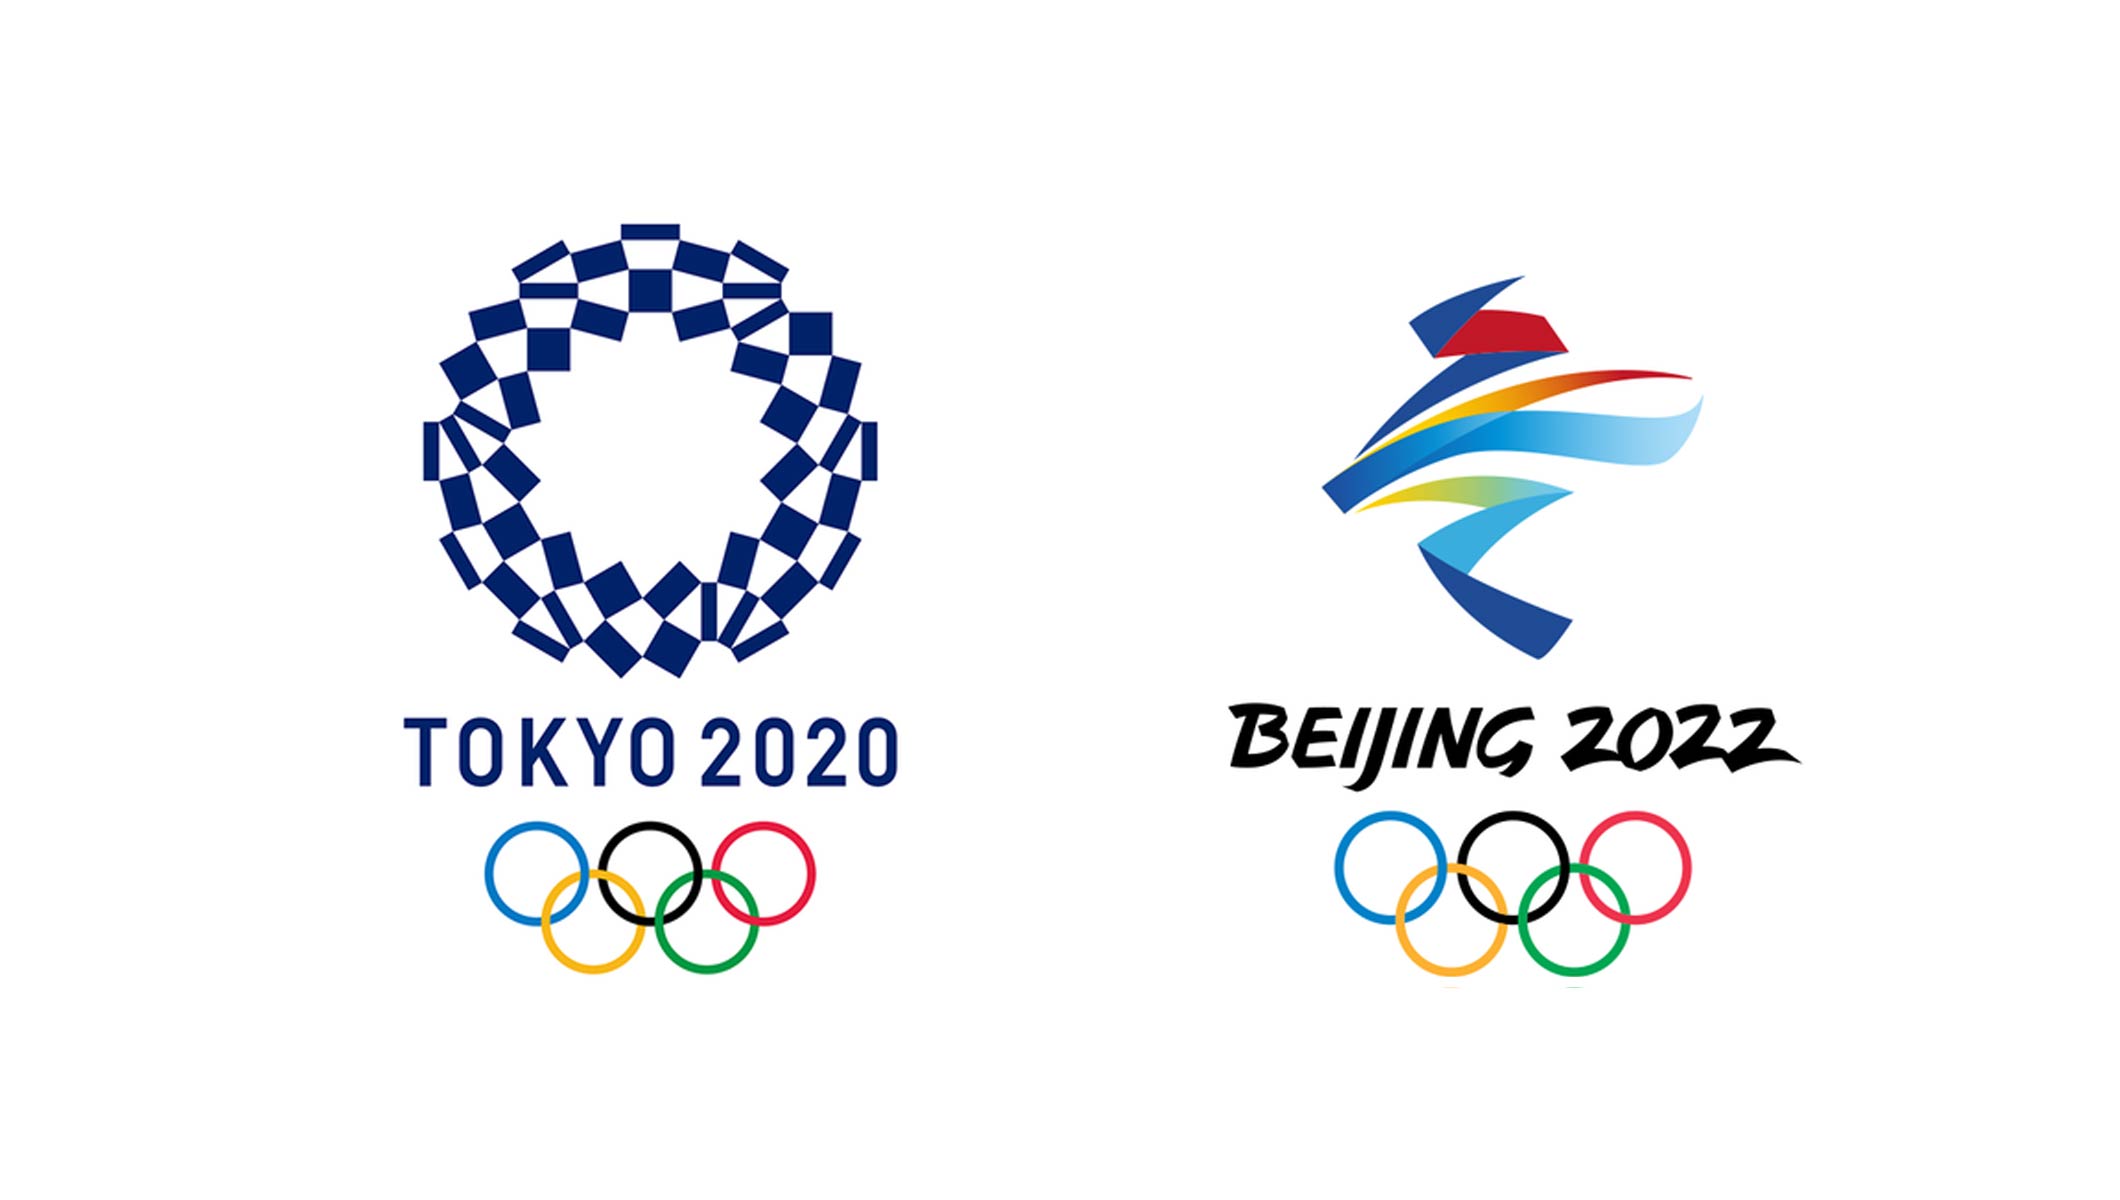 Tokyo 2020 And Beijing 2022 Come Together In Spirit Of Olympism Olympic News